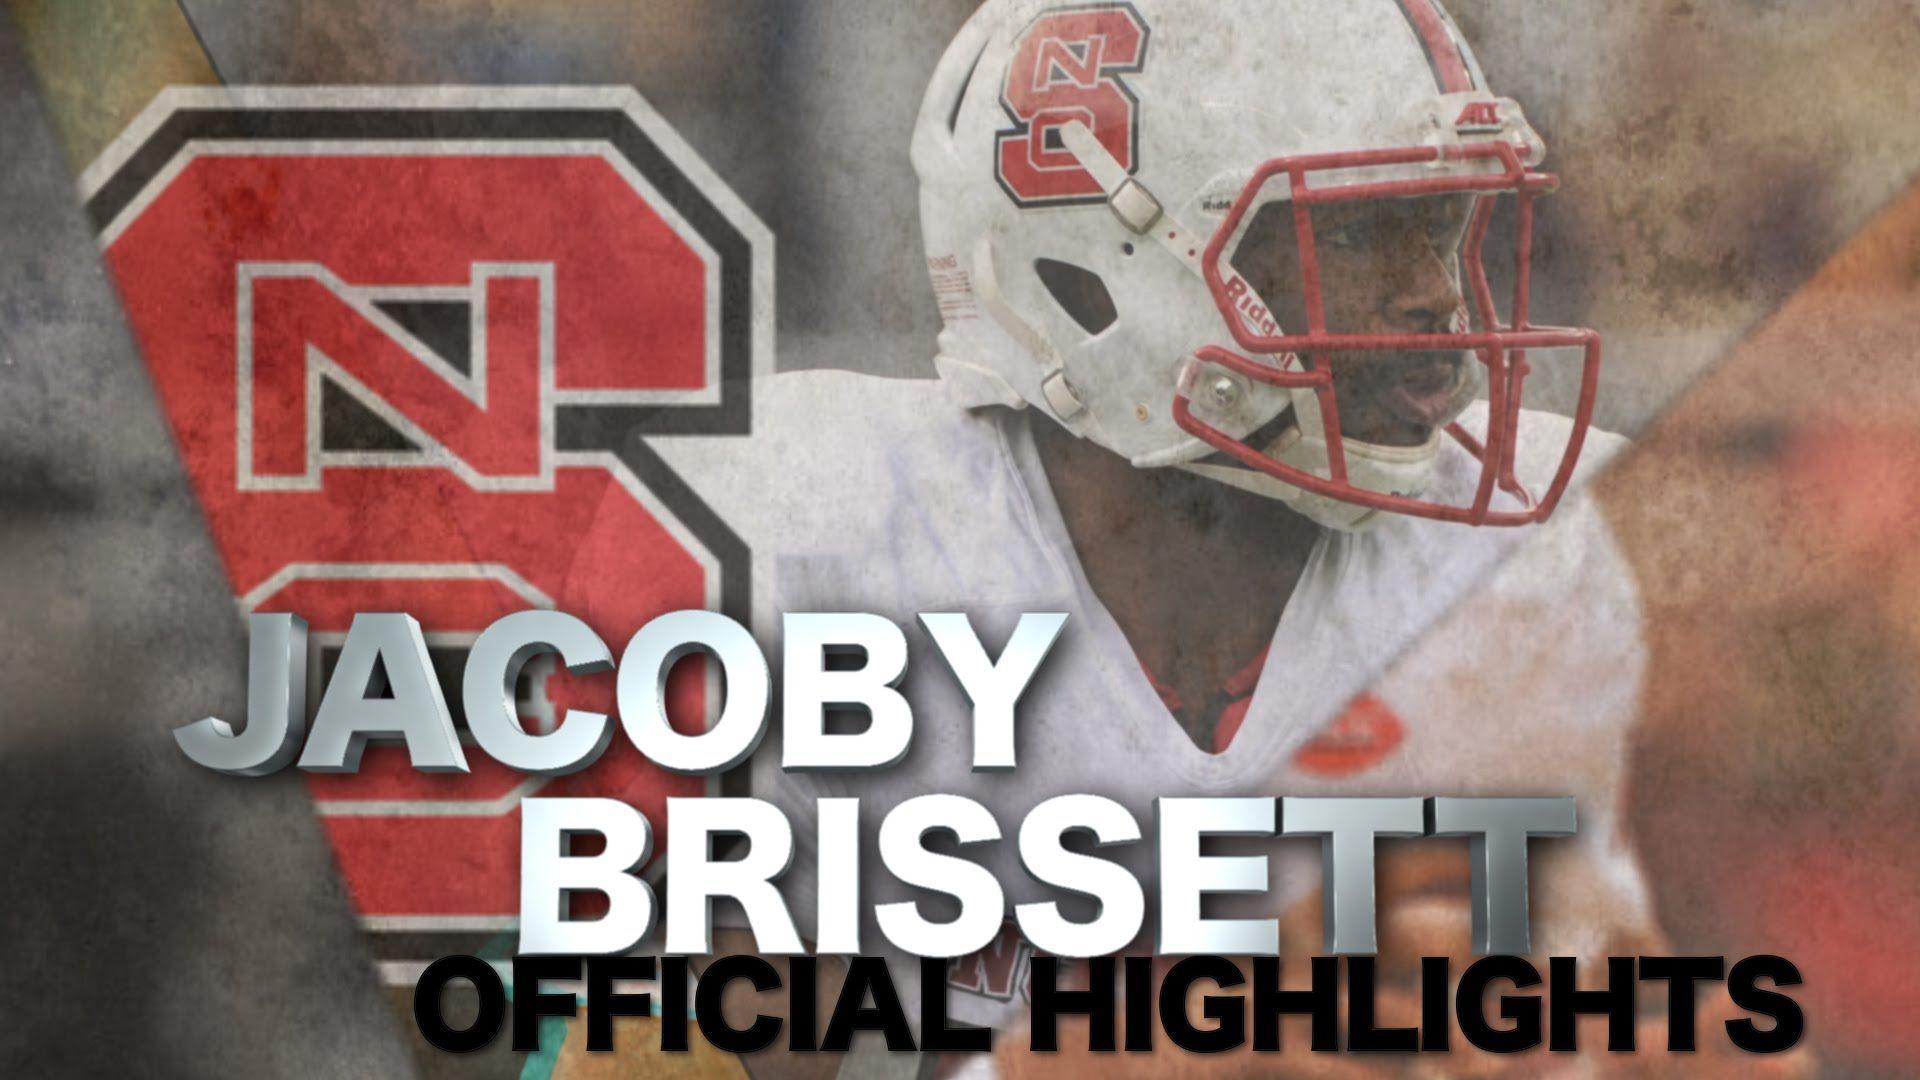 Jacoby Brissett Official Highlights. NC State QB